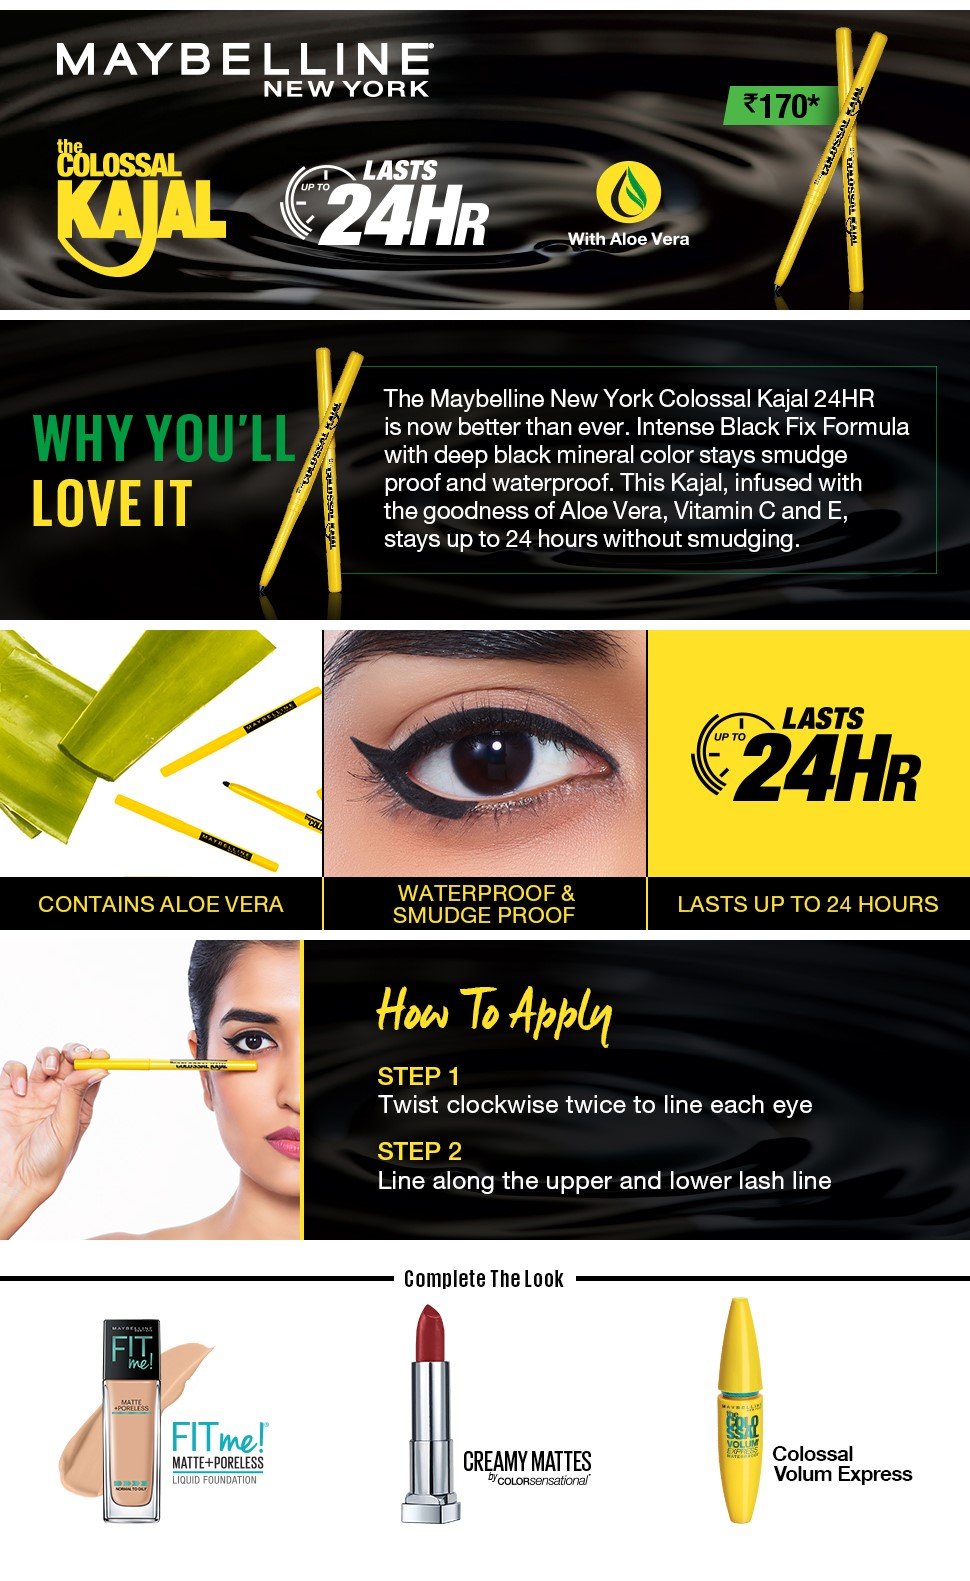 Maybelline Colossal Kajal - How to apply